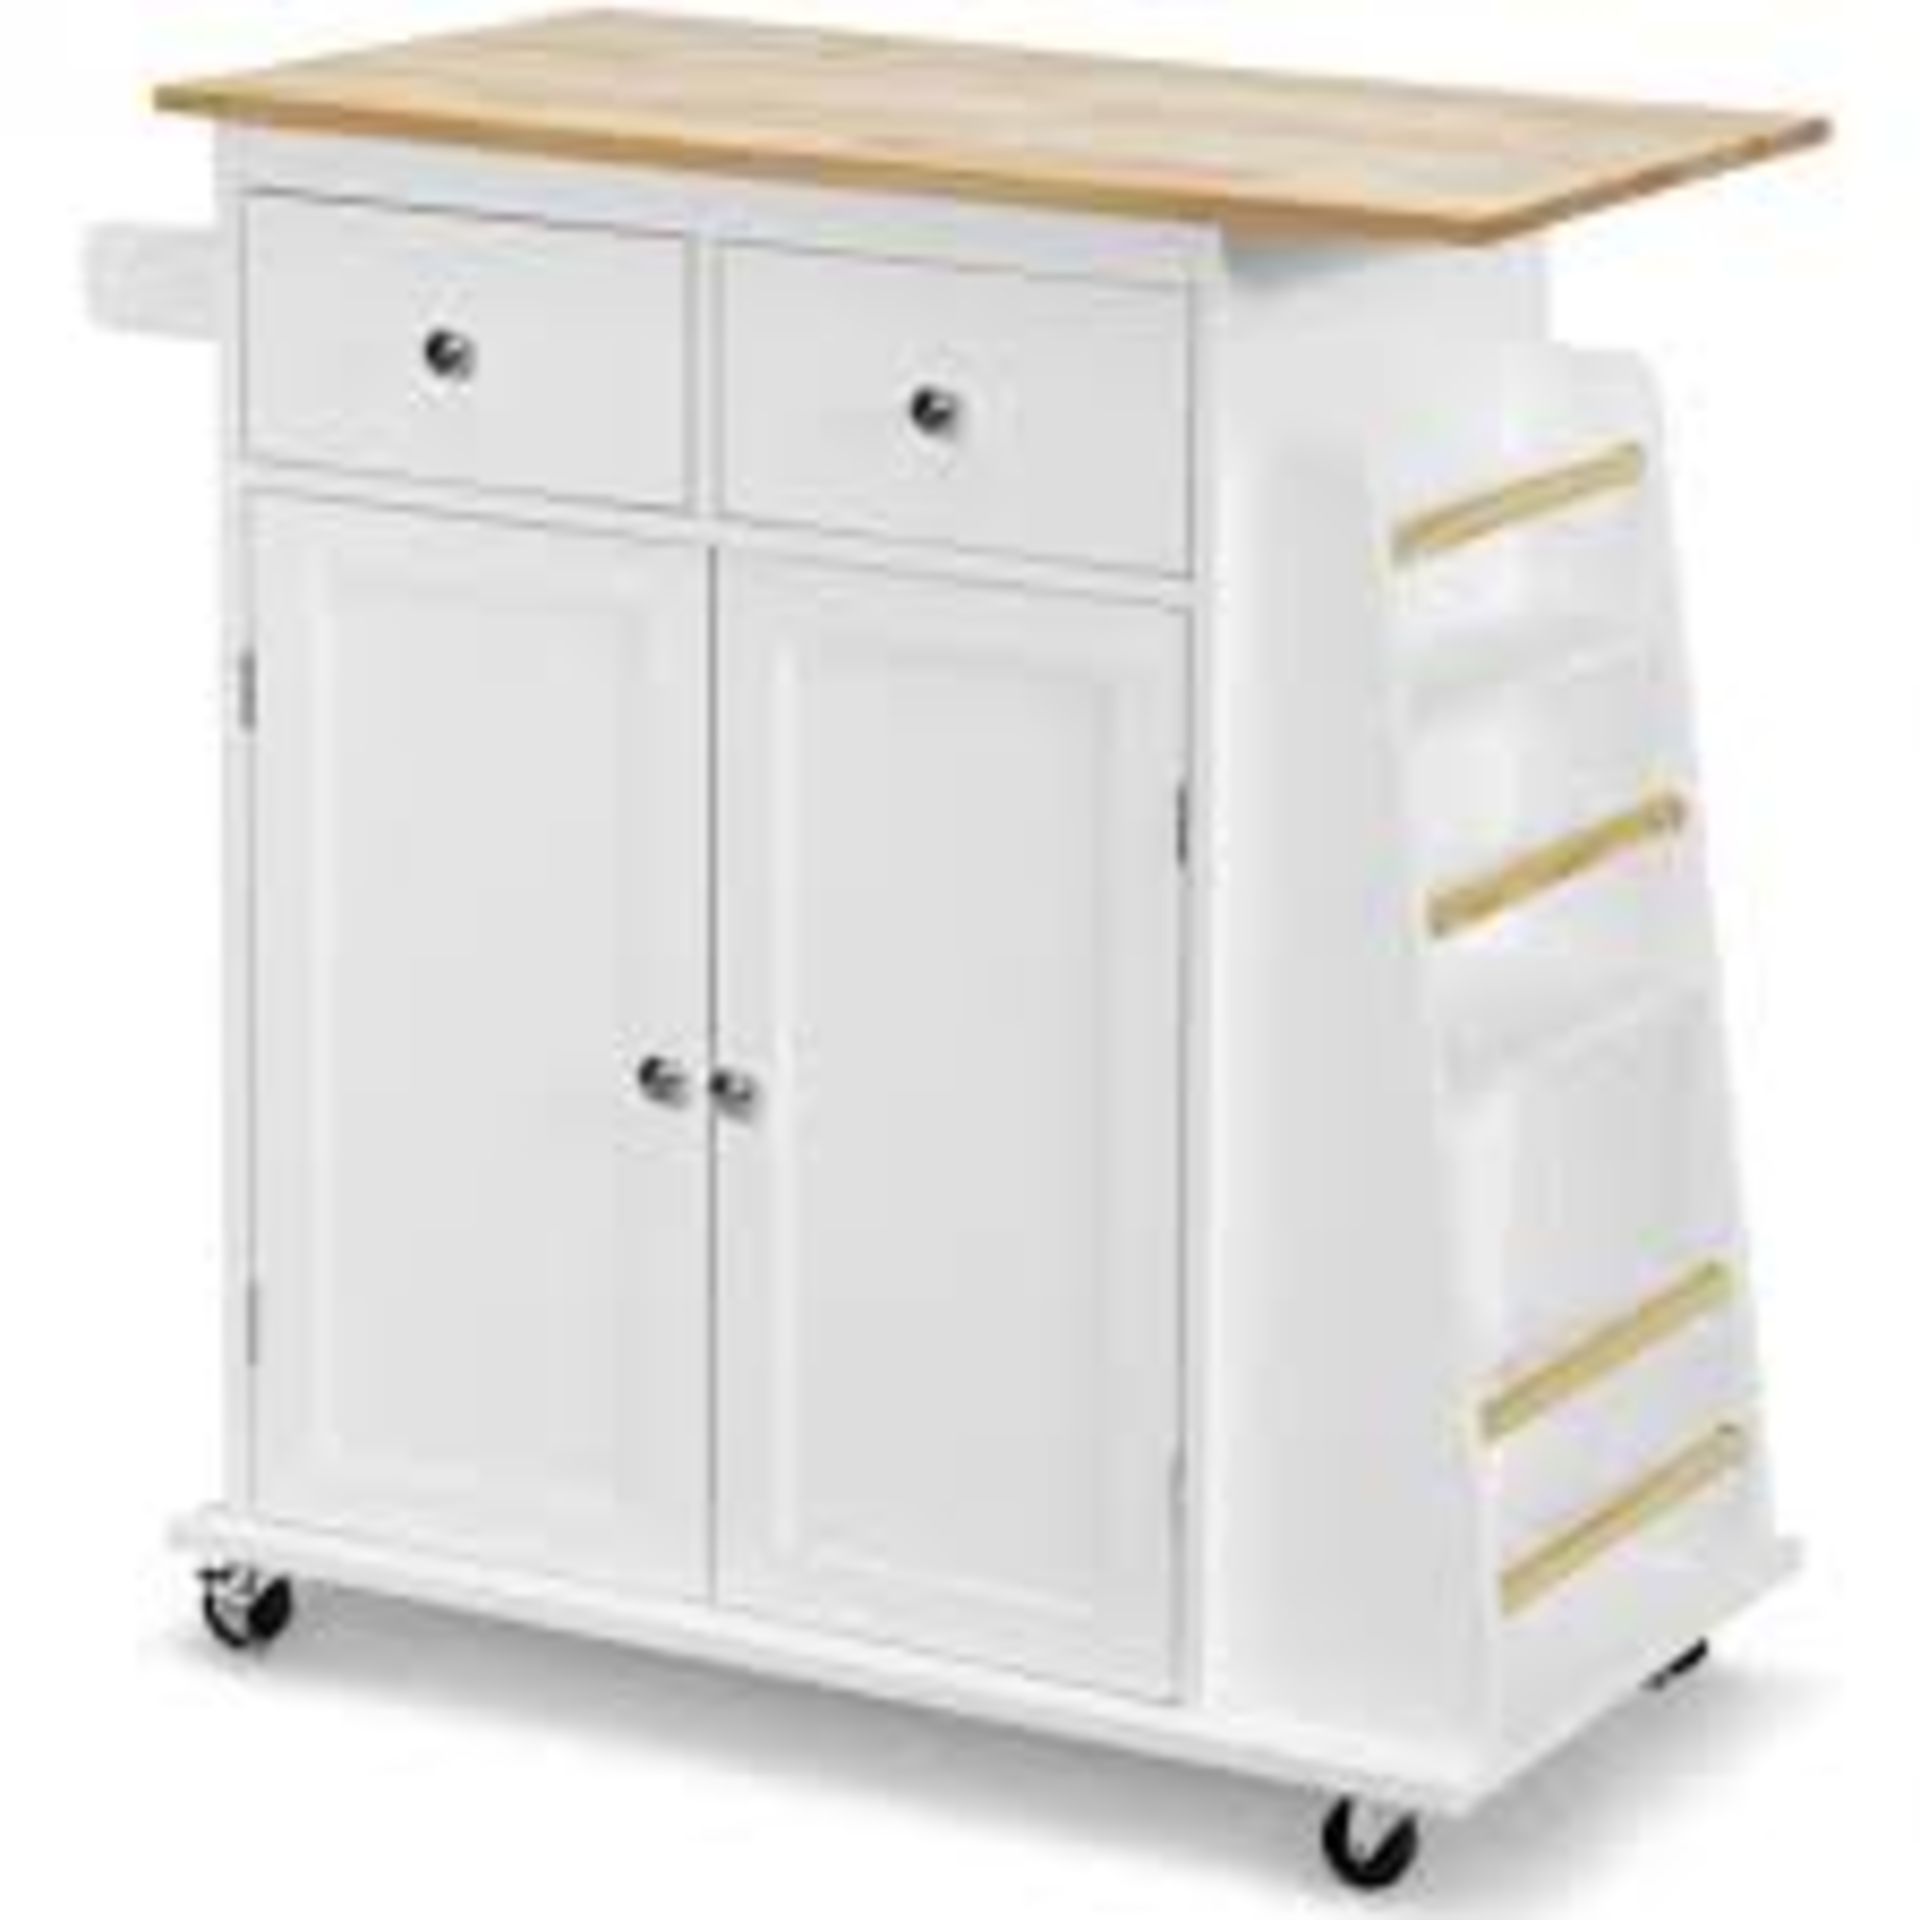 Rubber Wood Countertop Rolling Kitchen Island Cart-White. - R13a.4.